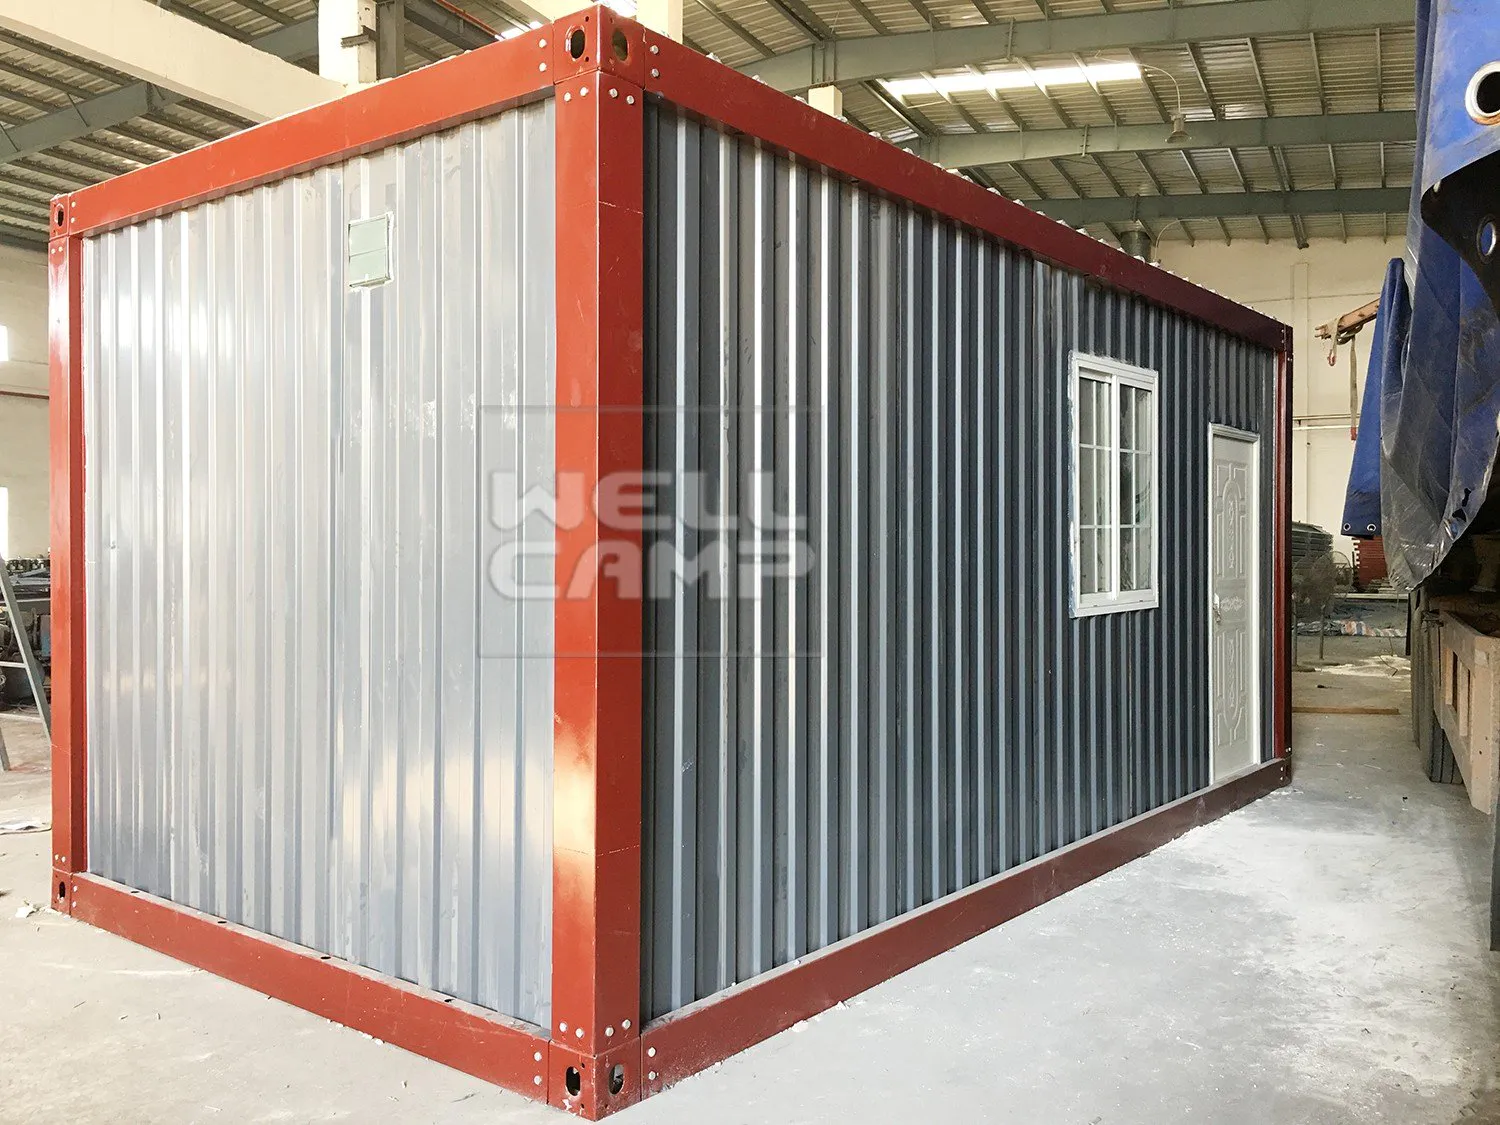 Hot detachable container house ieps WELLCAMP, WELLCAMP prefab house, WELLCAMP container house Brand